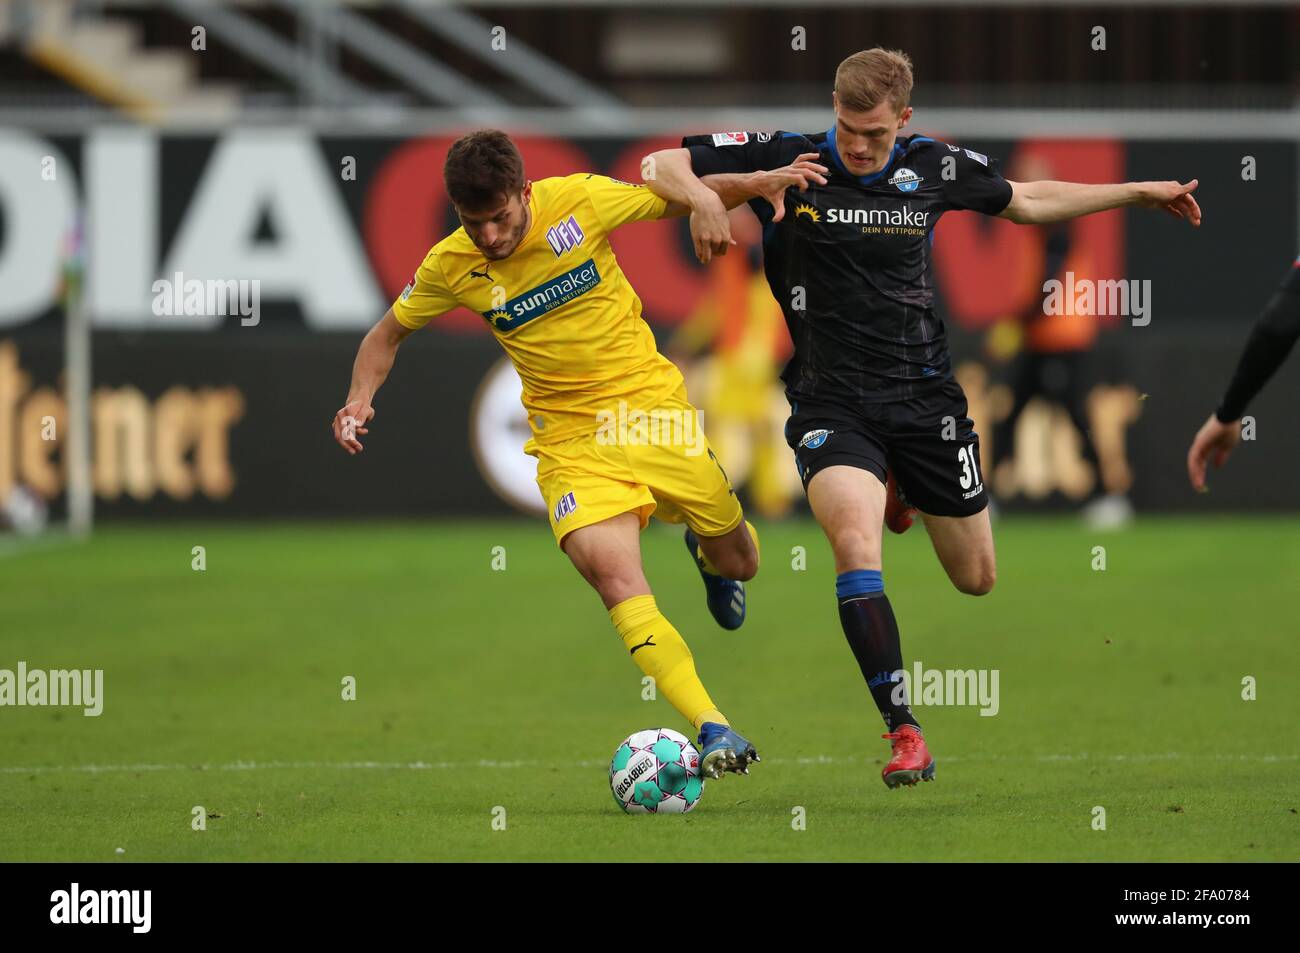 Paderborn, Germany. 21st Apr, 2021. Football: 2nd Bundesliga, SC Paderborn 07 - VfL Osnabrück, Matchday 30 at Benteler-Arena. Paderborn's Svante Ingelsson (r) battles for the ball with Osnabrück's Bashkim Ajdini (l). Credit: Friso Gentsch/dpa - IMPORTANT NOTE: In accordance with the regulations of the DFL Deutsche Fußball Liga and/or the DFB Deutscher Fußball-Bund, it is prohibited to use or have used photographs taken in the stadium and/or of the match in the form of sequence pictures and/or video-like photo series./dpa/Alamy Live News Stock Photo